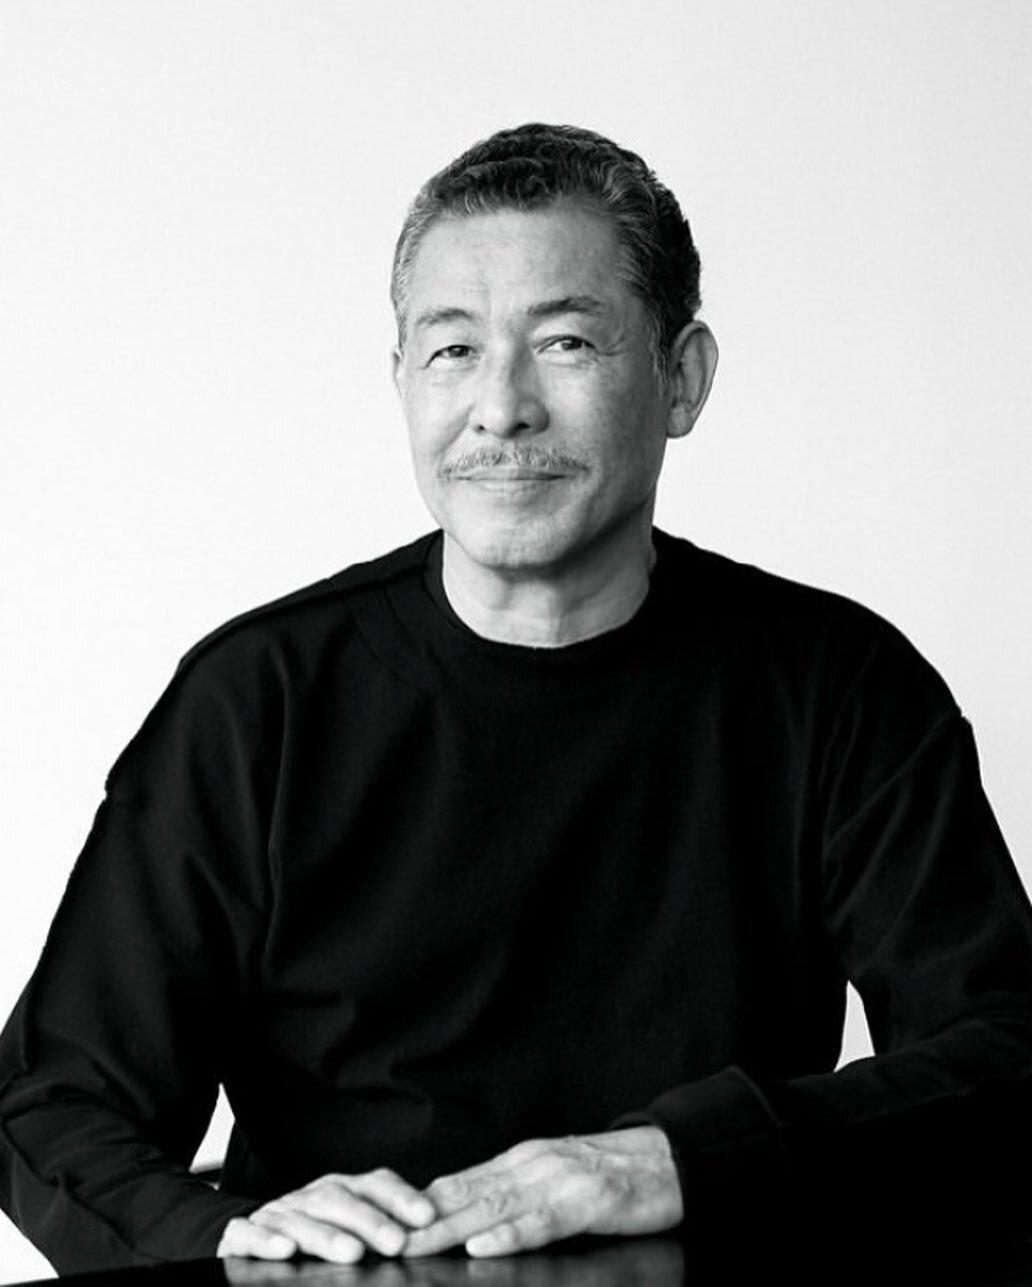 Last Friday we lost one of the most revolutionary designers of our time, Issey Miyake. Born 84 years ago in Hiroshima, Japan, Miyake moved to Paris and studied fashion design under Guy Laroche and Hubert de Givenchy.  He subsequently worked for a bri